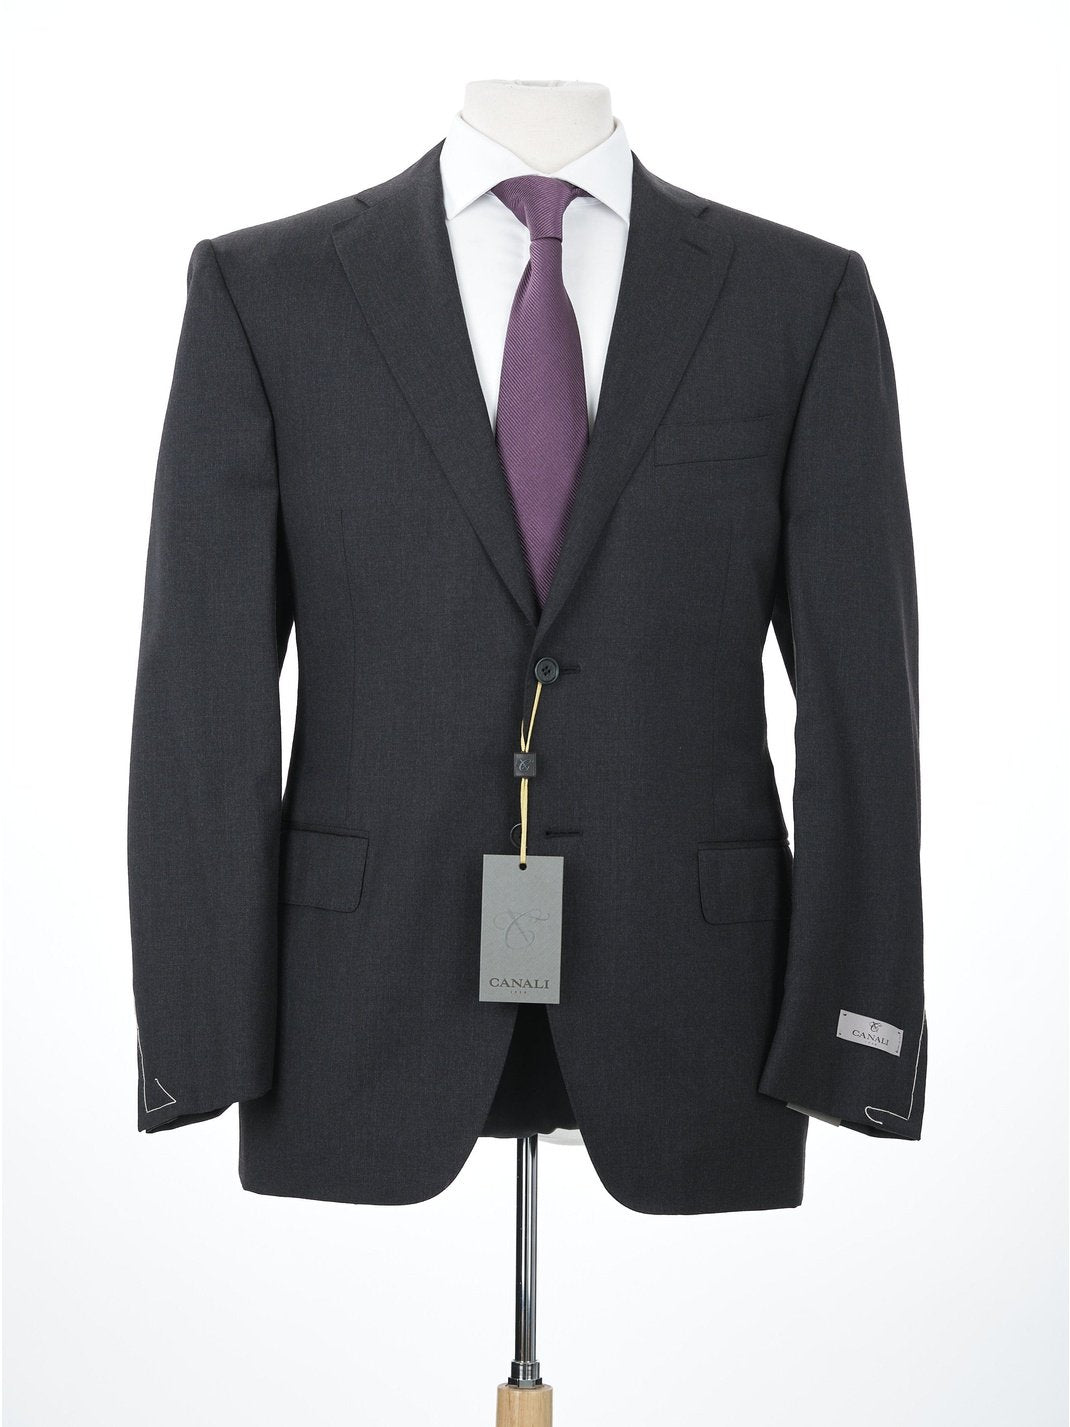 Canali 1934 Mens Solid Charcoal Gray 44R Drop 7 100% Wool 2 Piece Suit